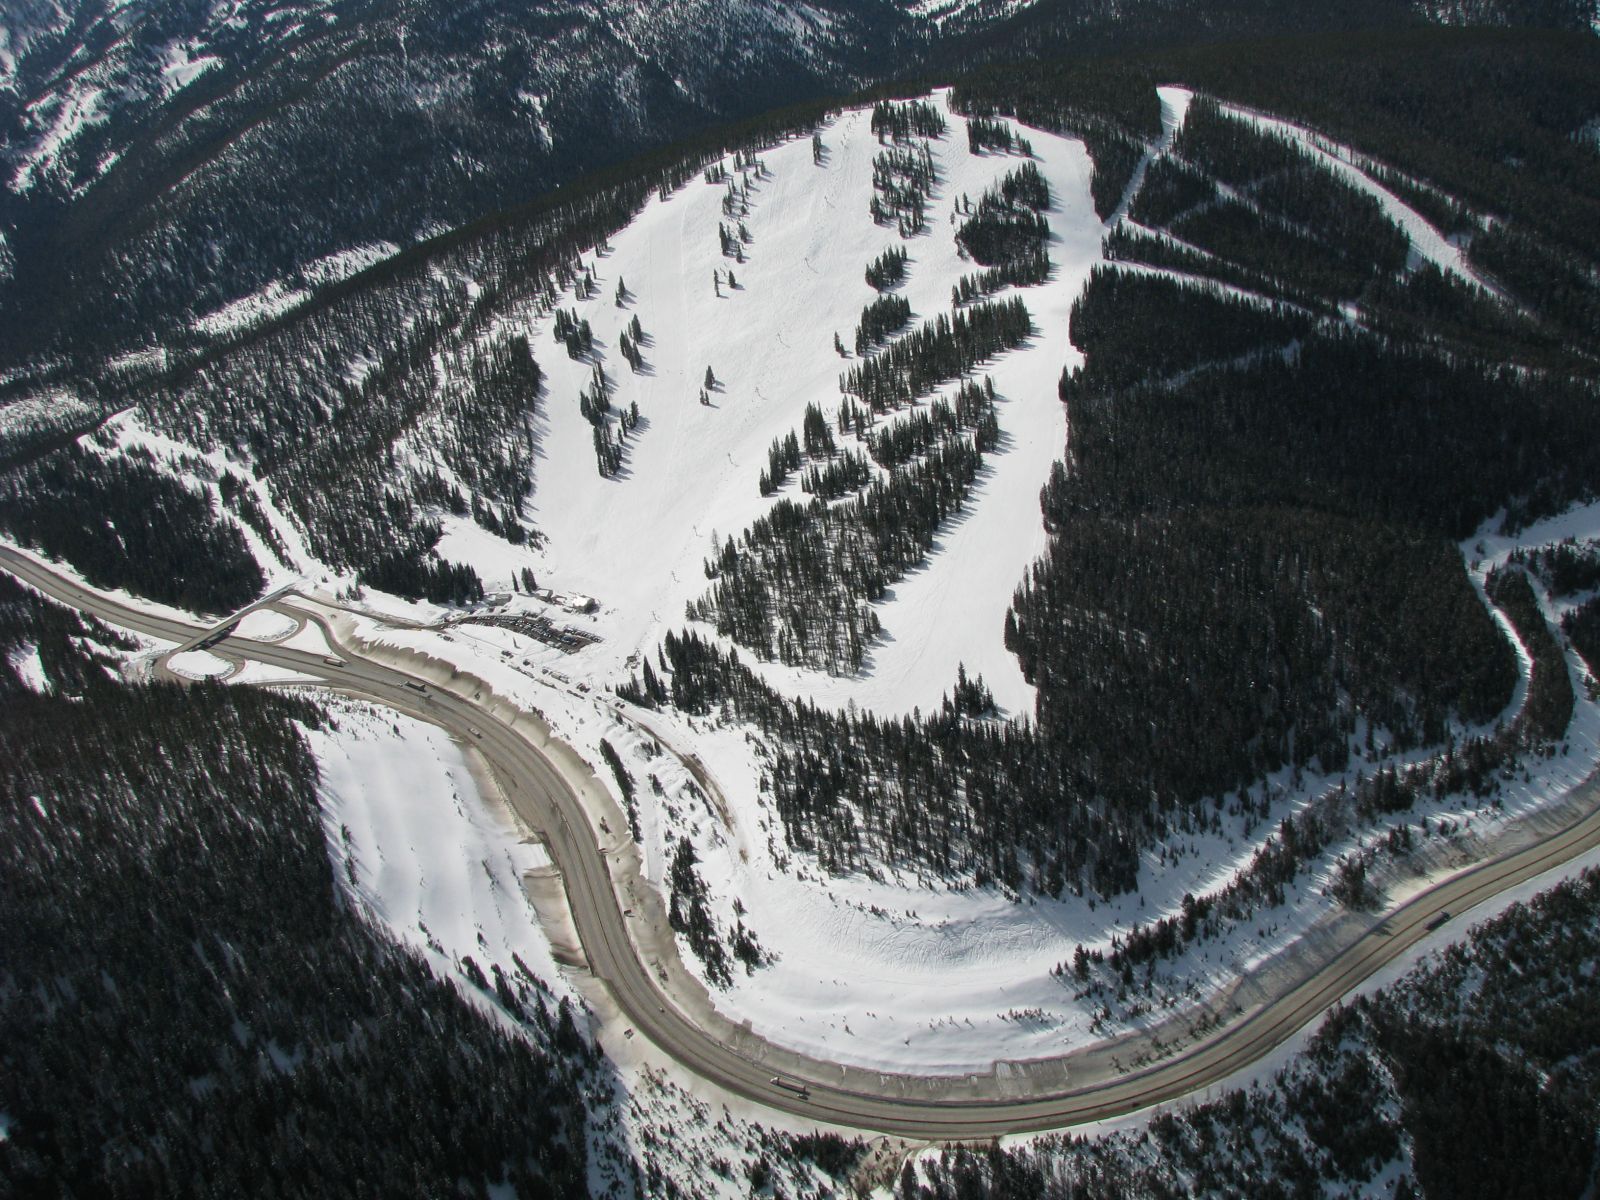 Aerial photo of the the ski hill